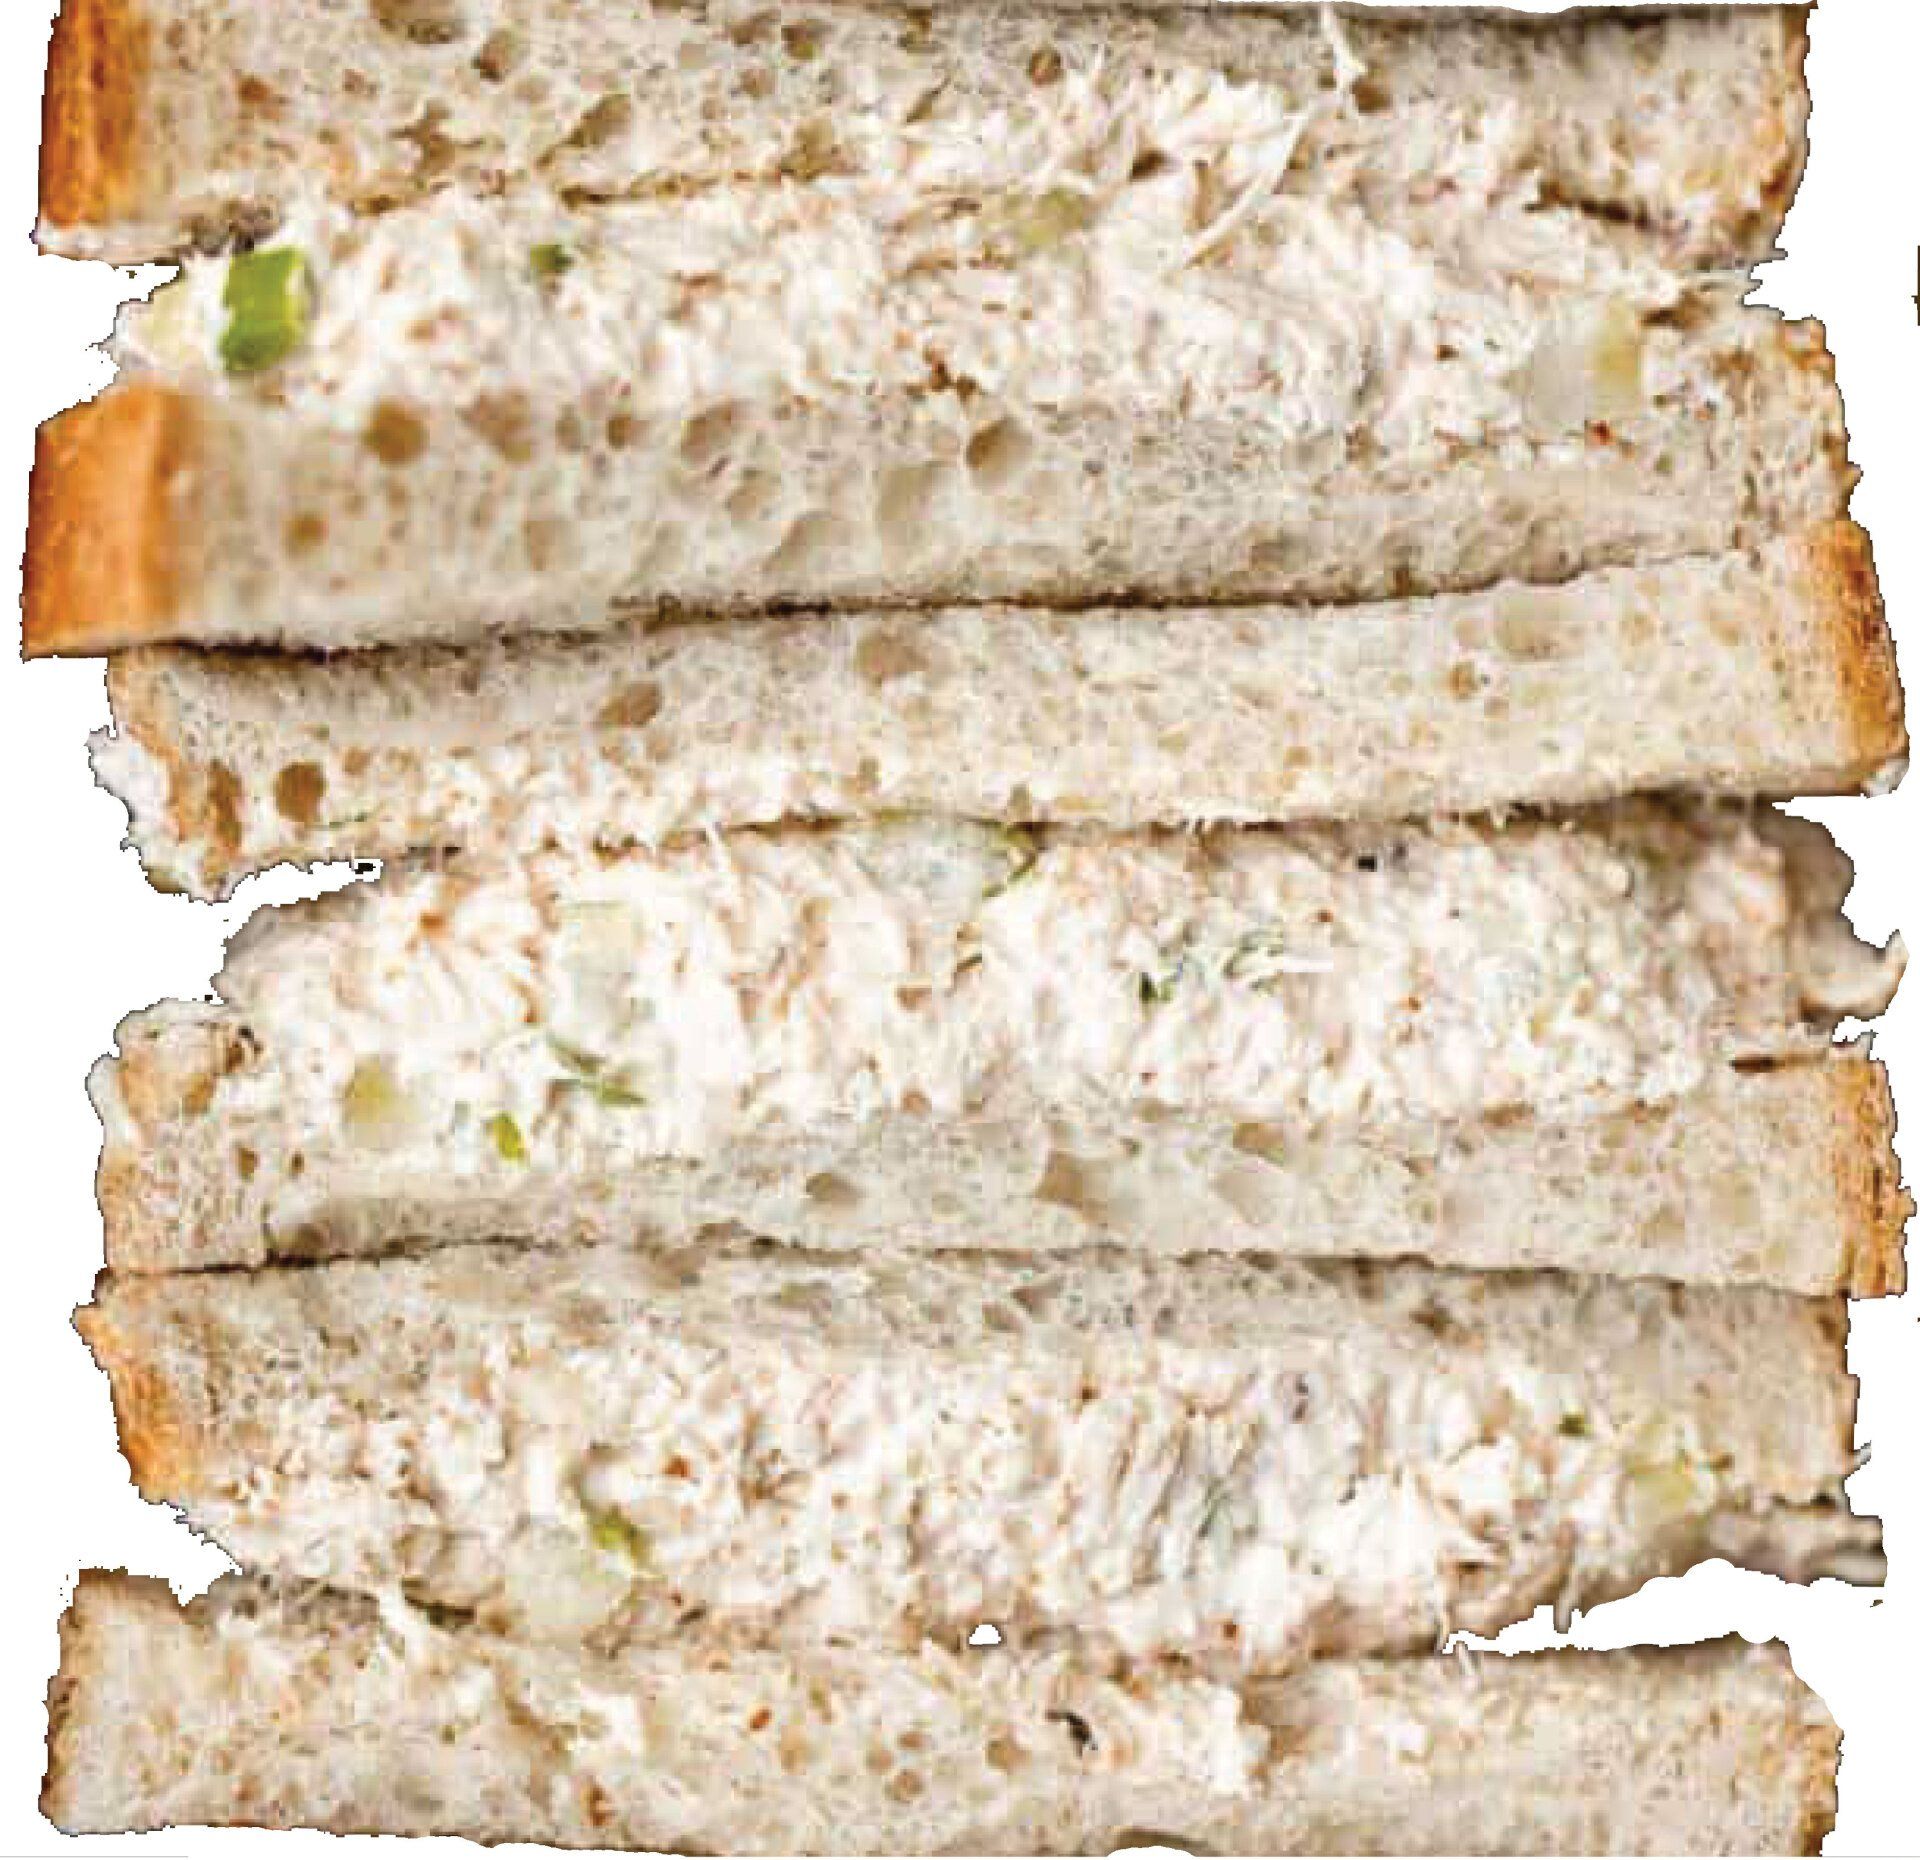 Stand-by recipe for a reason, it's a classic chicken salad for sandwiches, at Bay Favors Food Blog